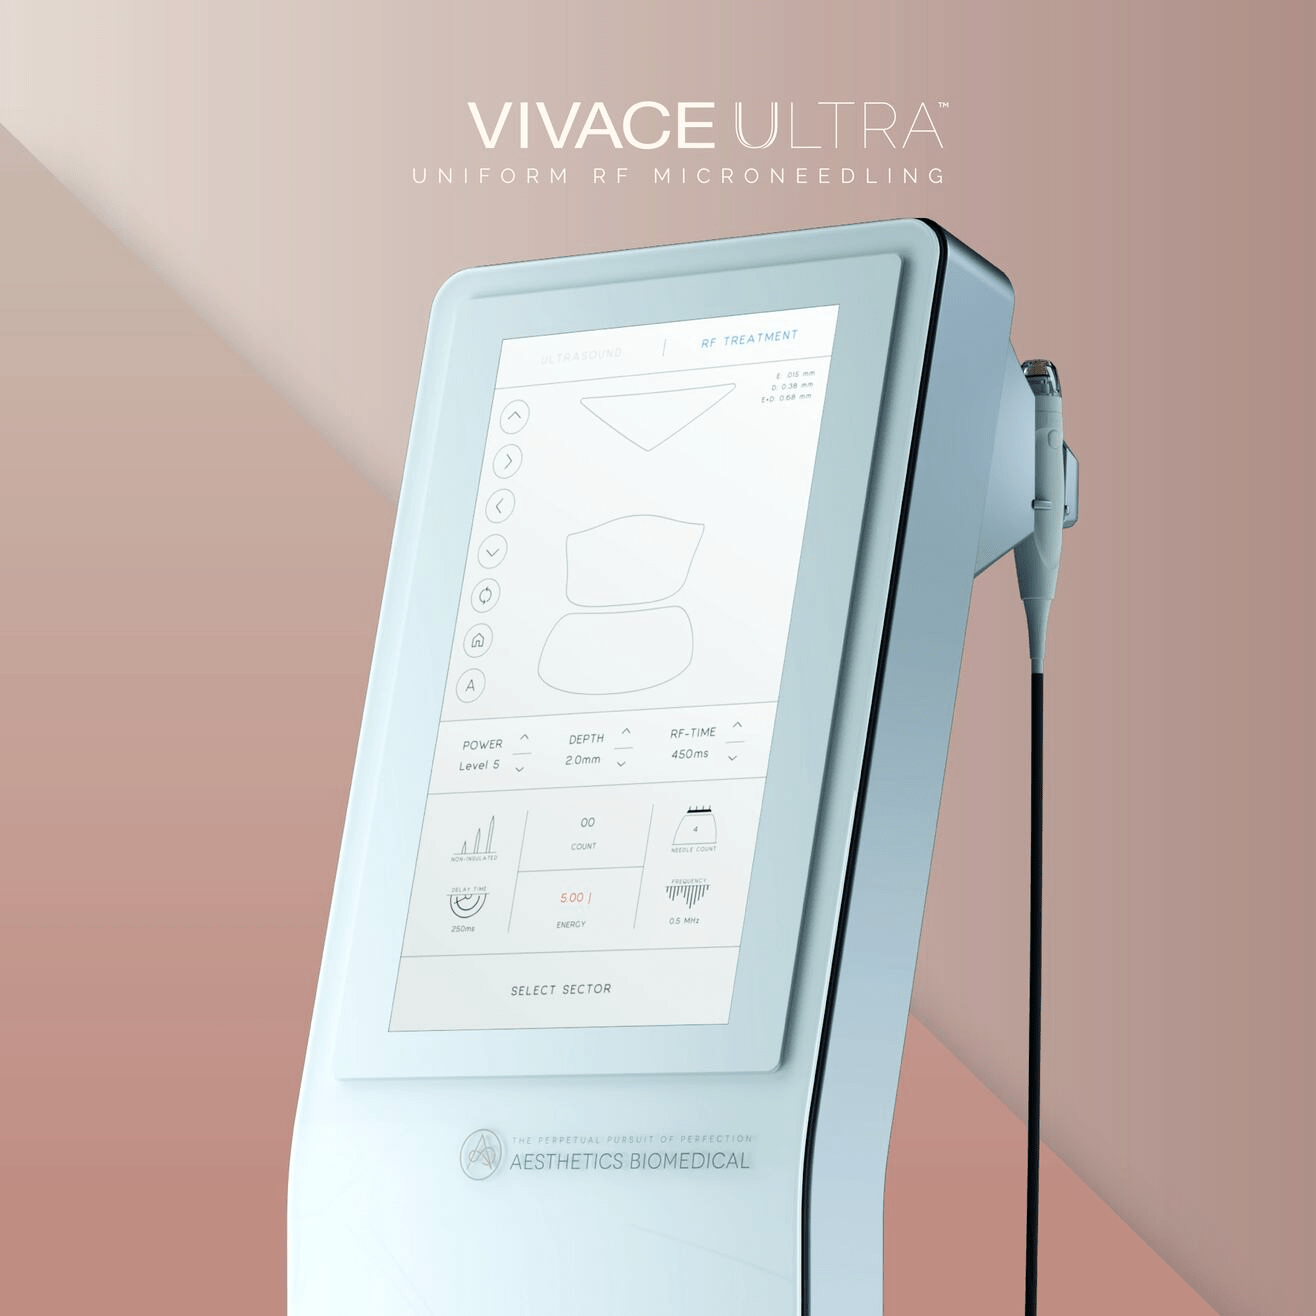 Vivace Ultra ™ uses linear array ultrasound technology to visually map the skin across its large interface